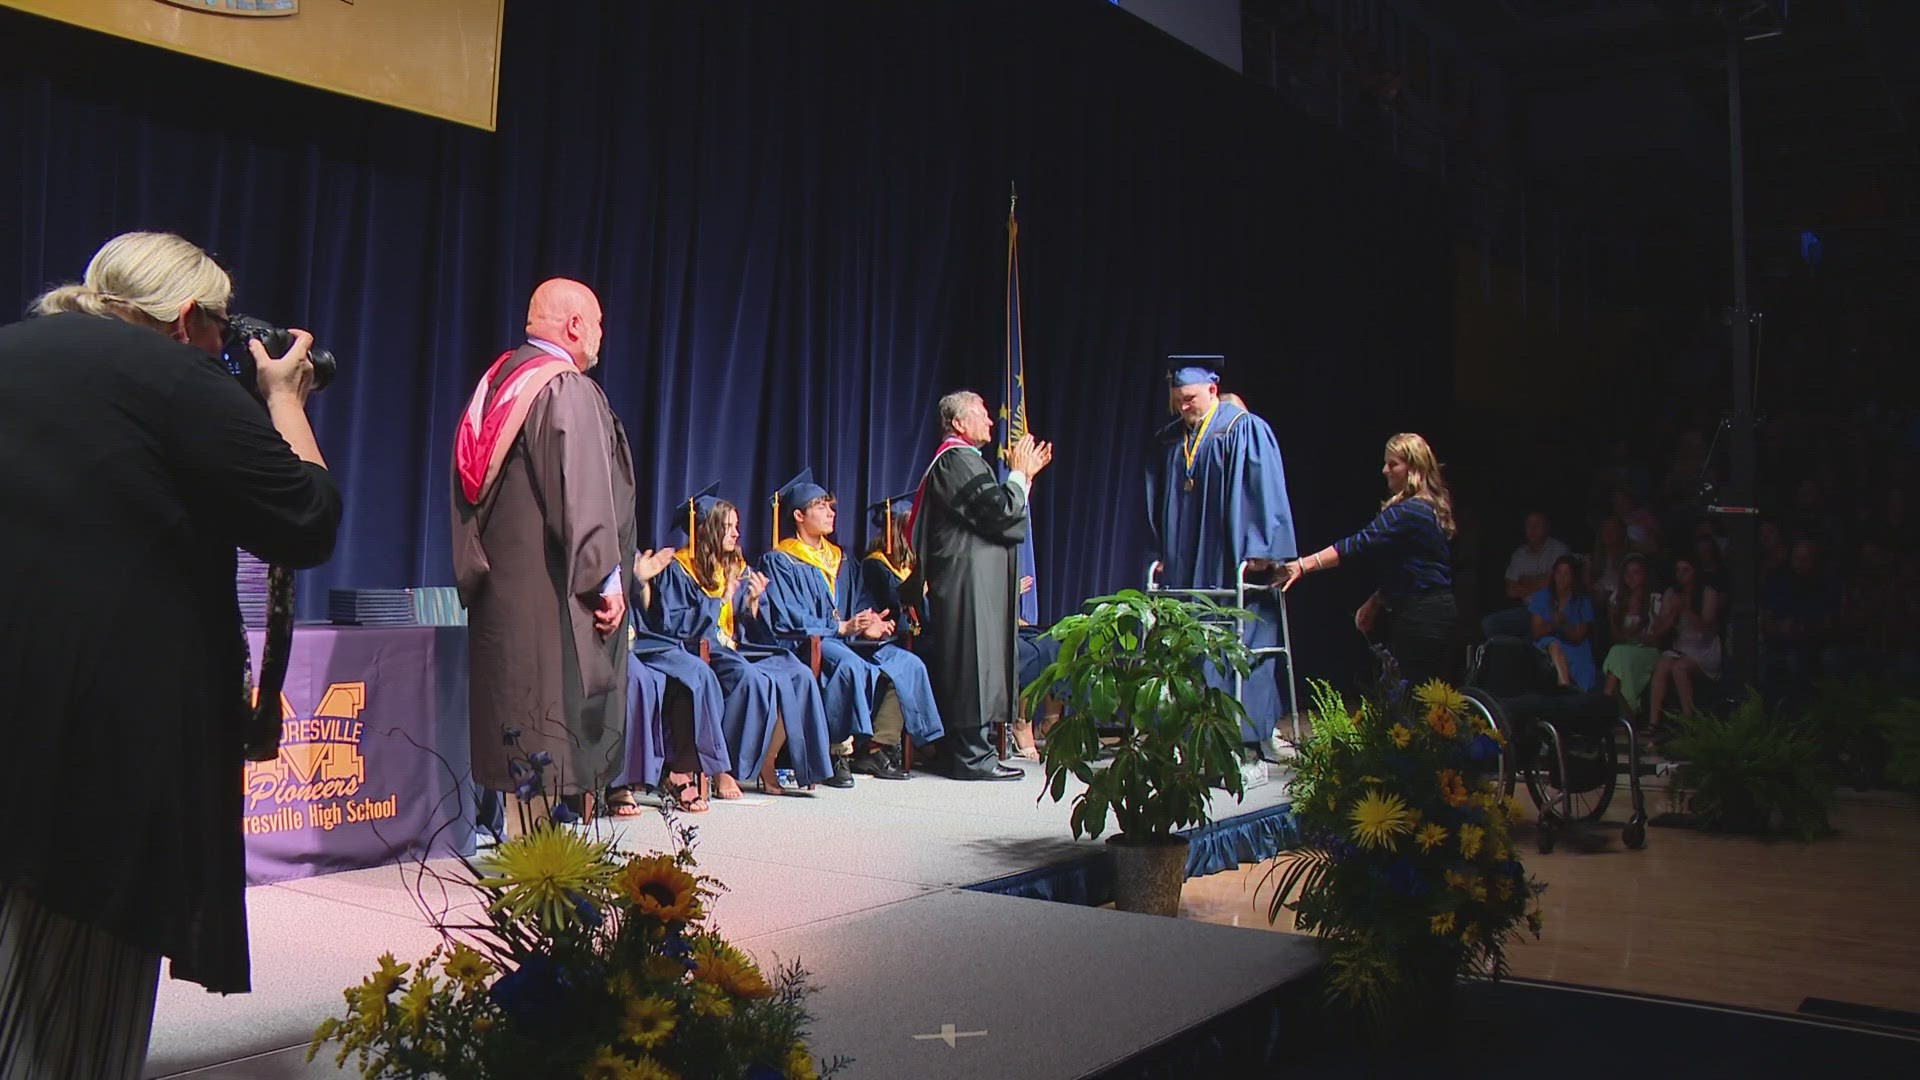 Lucas Grounds proudly walked across the Mooresville High School graduation stage recently.